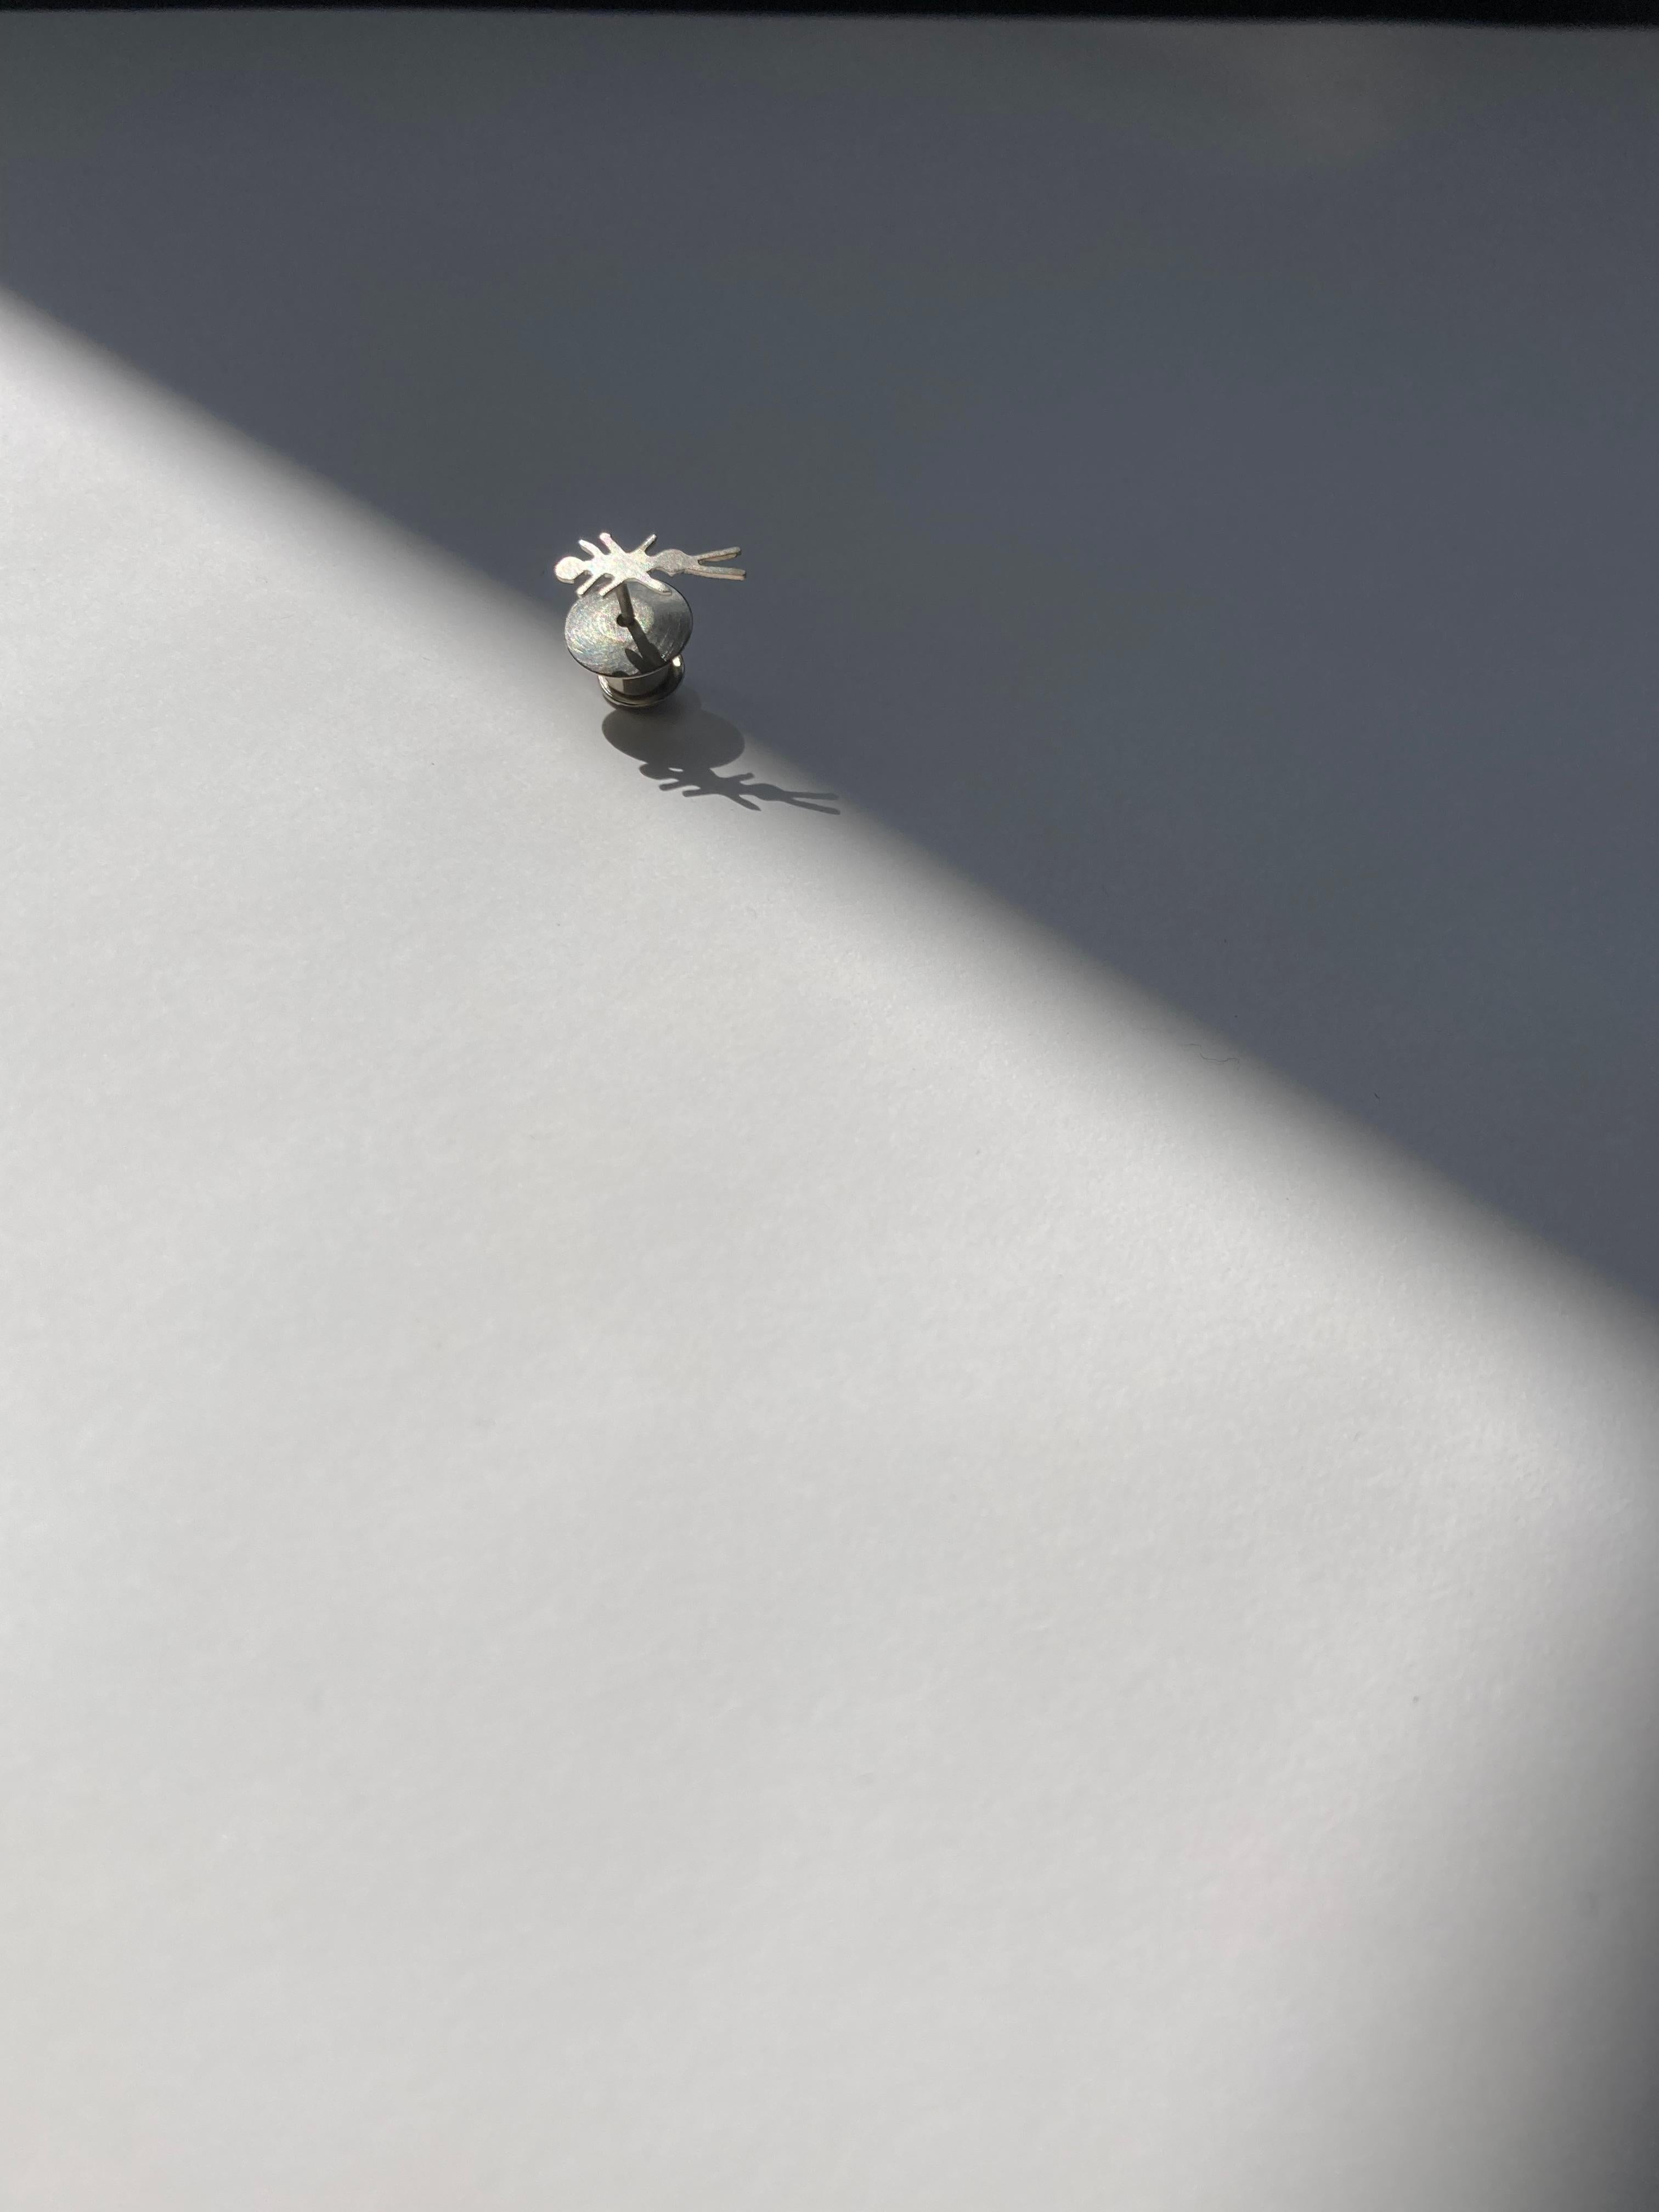 This playful ant pin is a subtle embellishment for your clothing. Great on a lapel, or perhaps scattered across a garment. 

It is hand cut by eye from sterling silver, and is finished with a matte sheen to subtly catch the light when worn. Each is